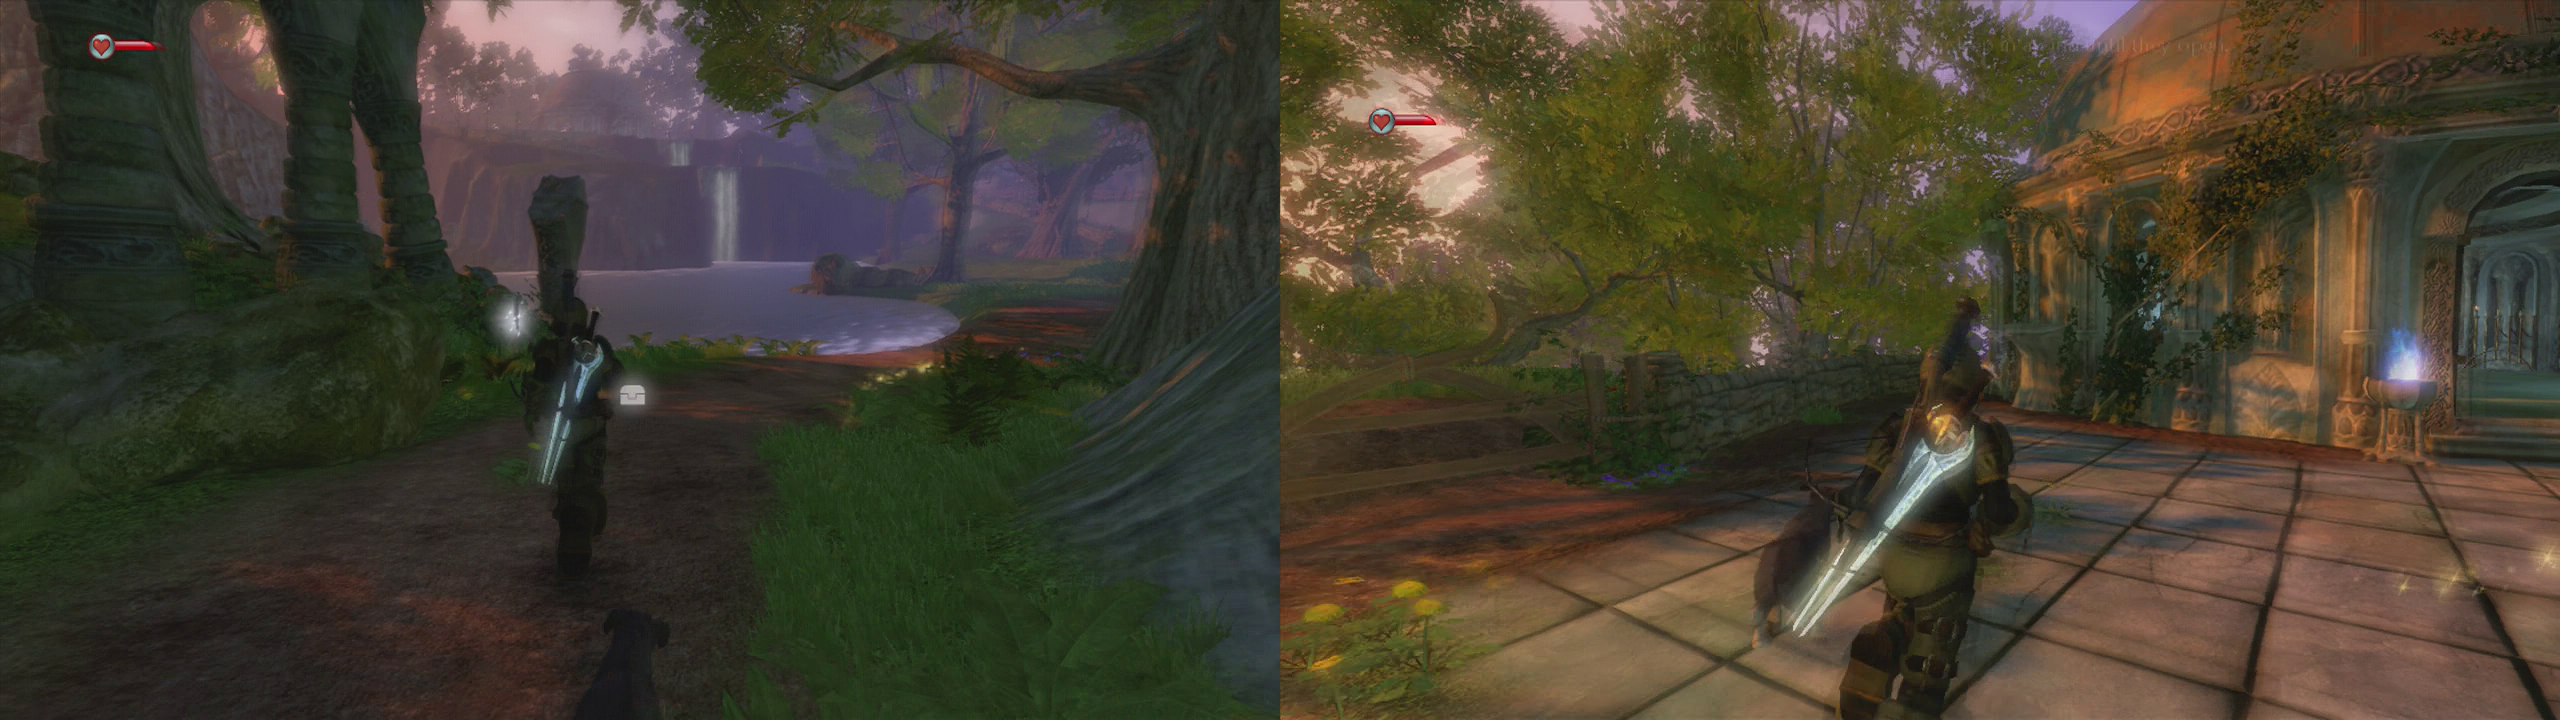 Grab the silver key on the side of the road (left) as you make your way to the Temple of Light (right).